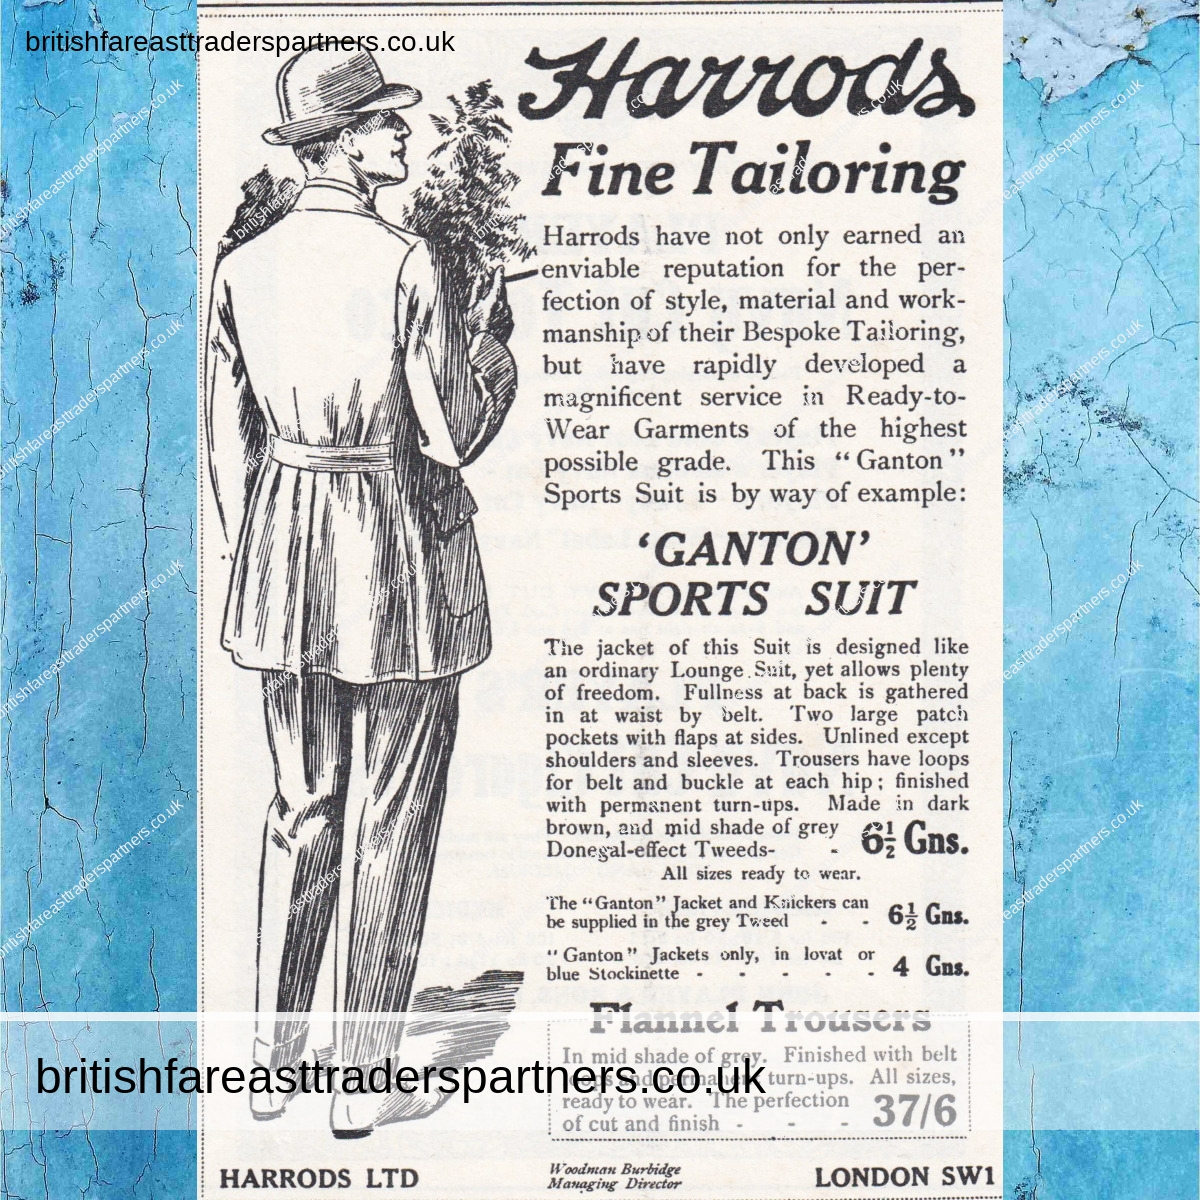 ANTIQUE 1920 PRINT ADVERTISING FROM THE ILLUSTRATED LONDON NEWS “HARRODS FINE TAILORING” VINTAGE & ANTIQUES | COLLECTABLES | FASHION | ADVERTISING COLLECTABLES |  PAPER & EPHEMERA | BRITISH FASHION HERITAGE | LIFESTYLE & CULTURE